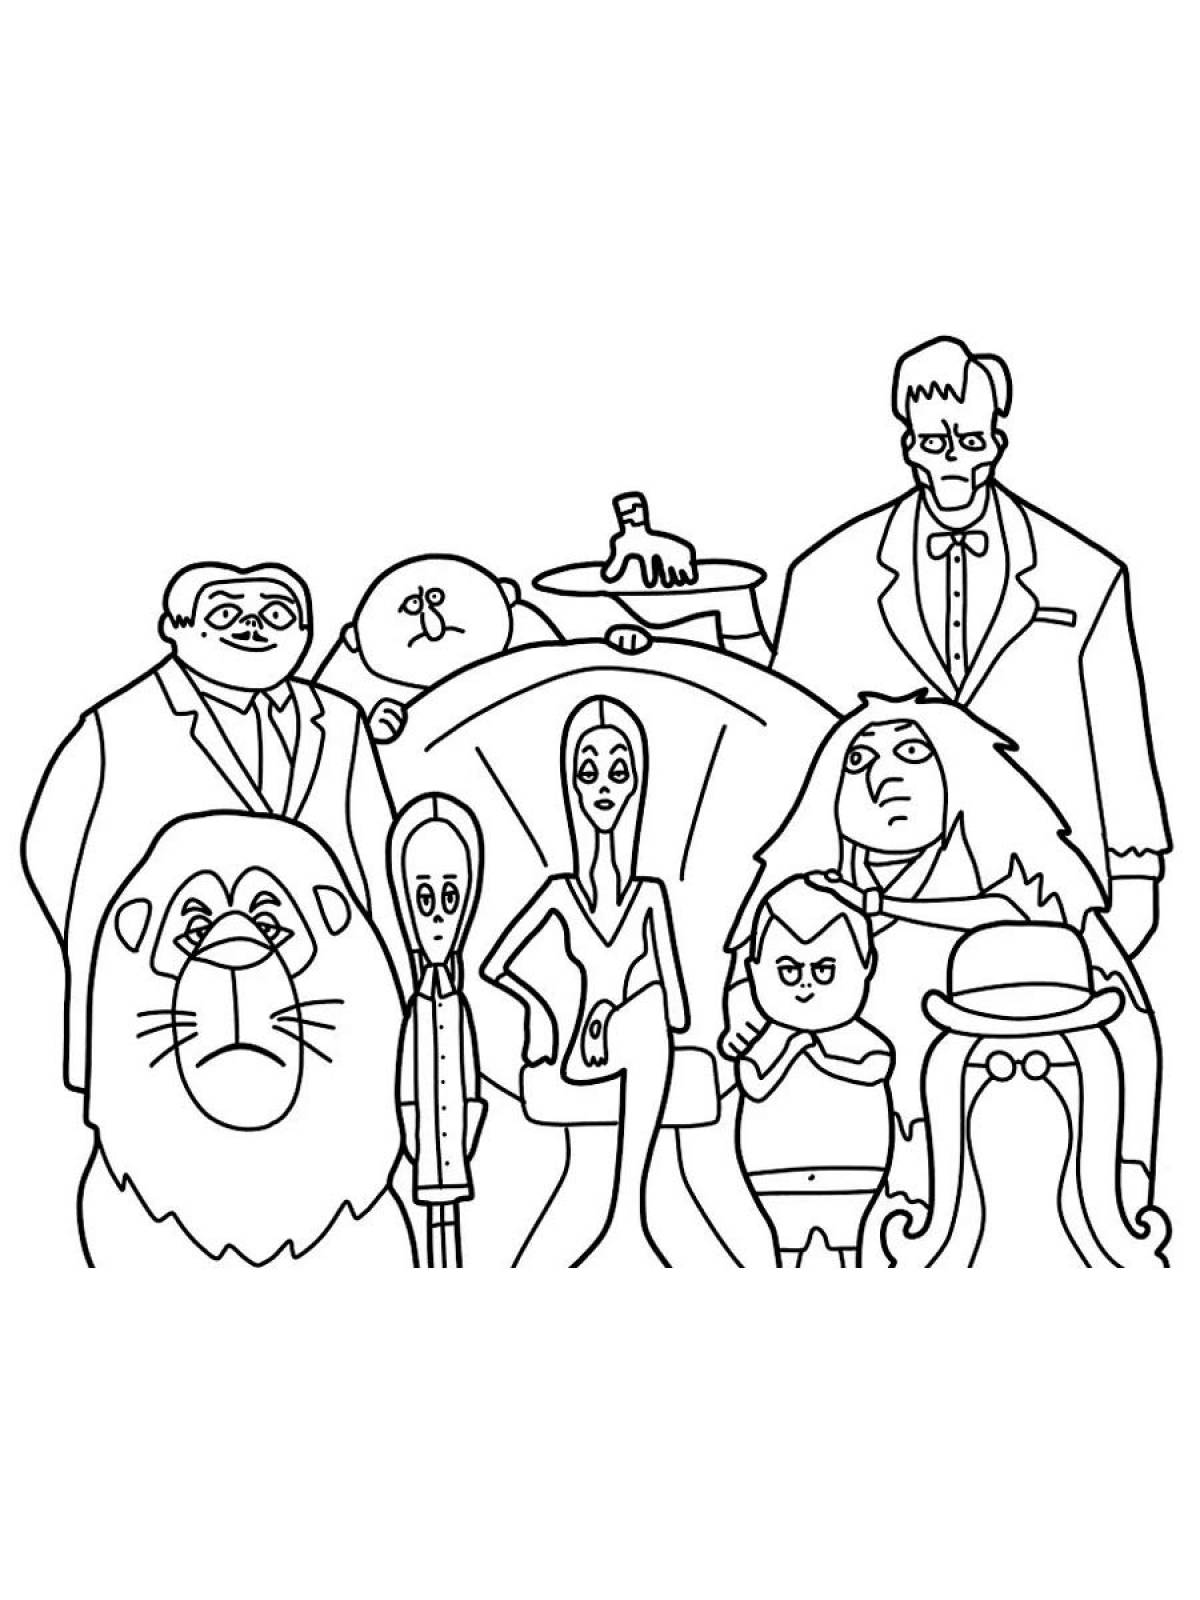 Addams family for kids #9